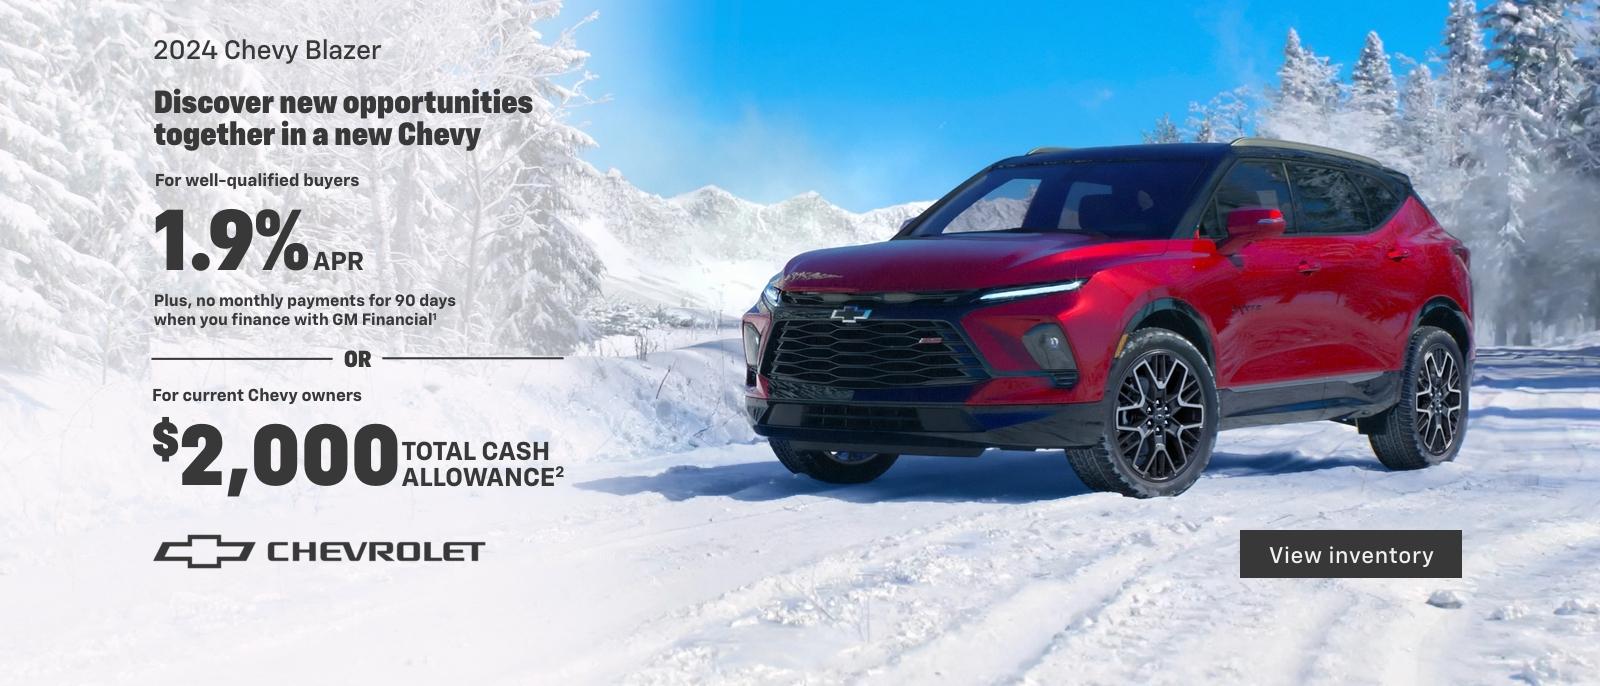 2024 Chevy Blazer. For well-qualified buyers 1.9% APR + no monthly payments for 90 days when you finance with GM Financial. Or, for current Chevy owners $2,000 total cash allowance.